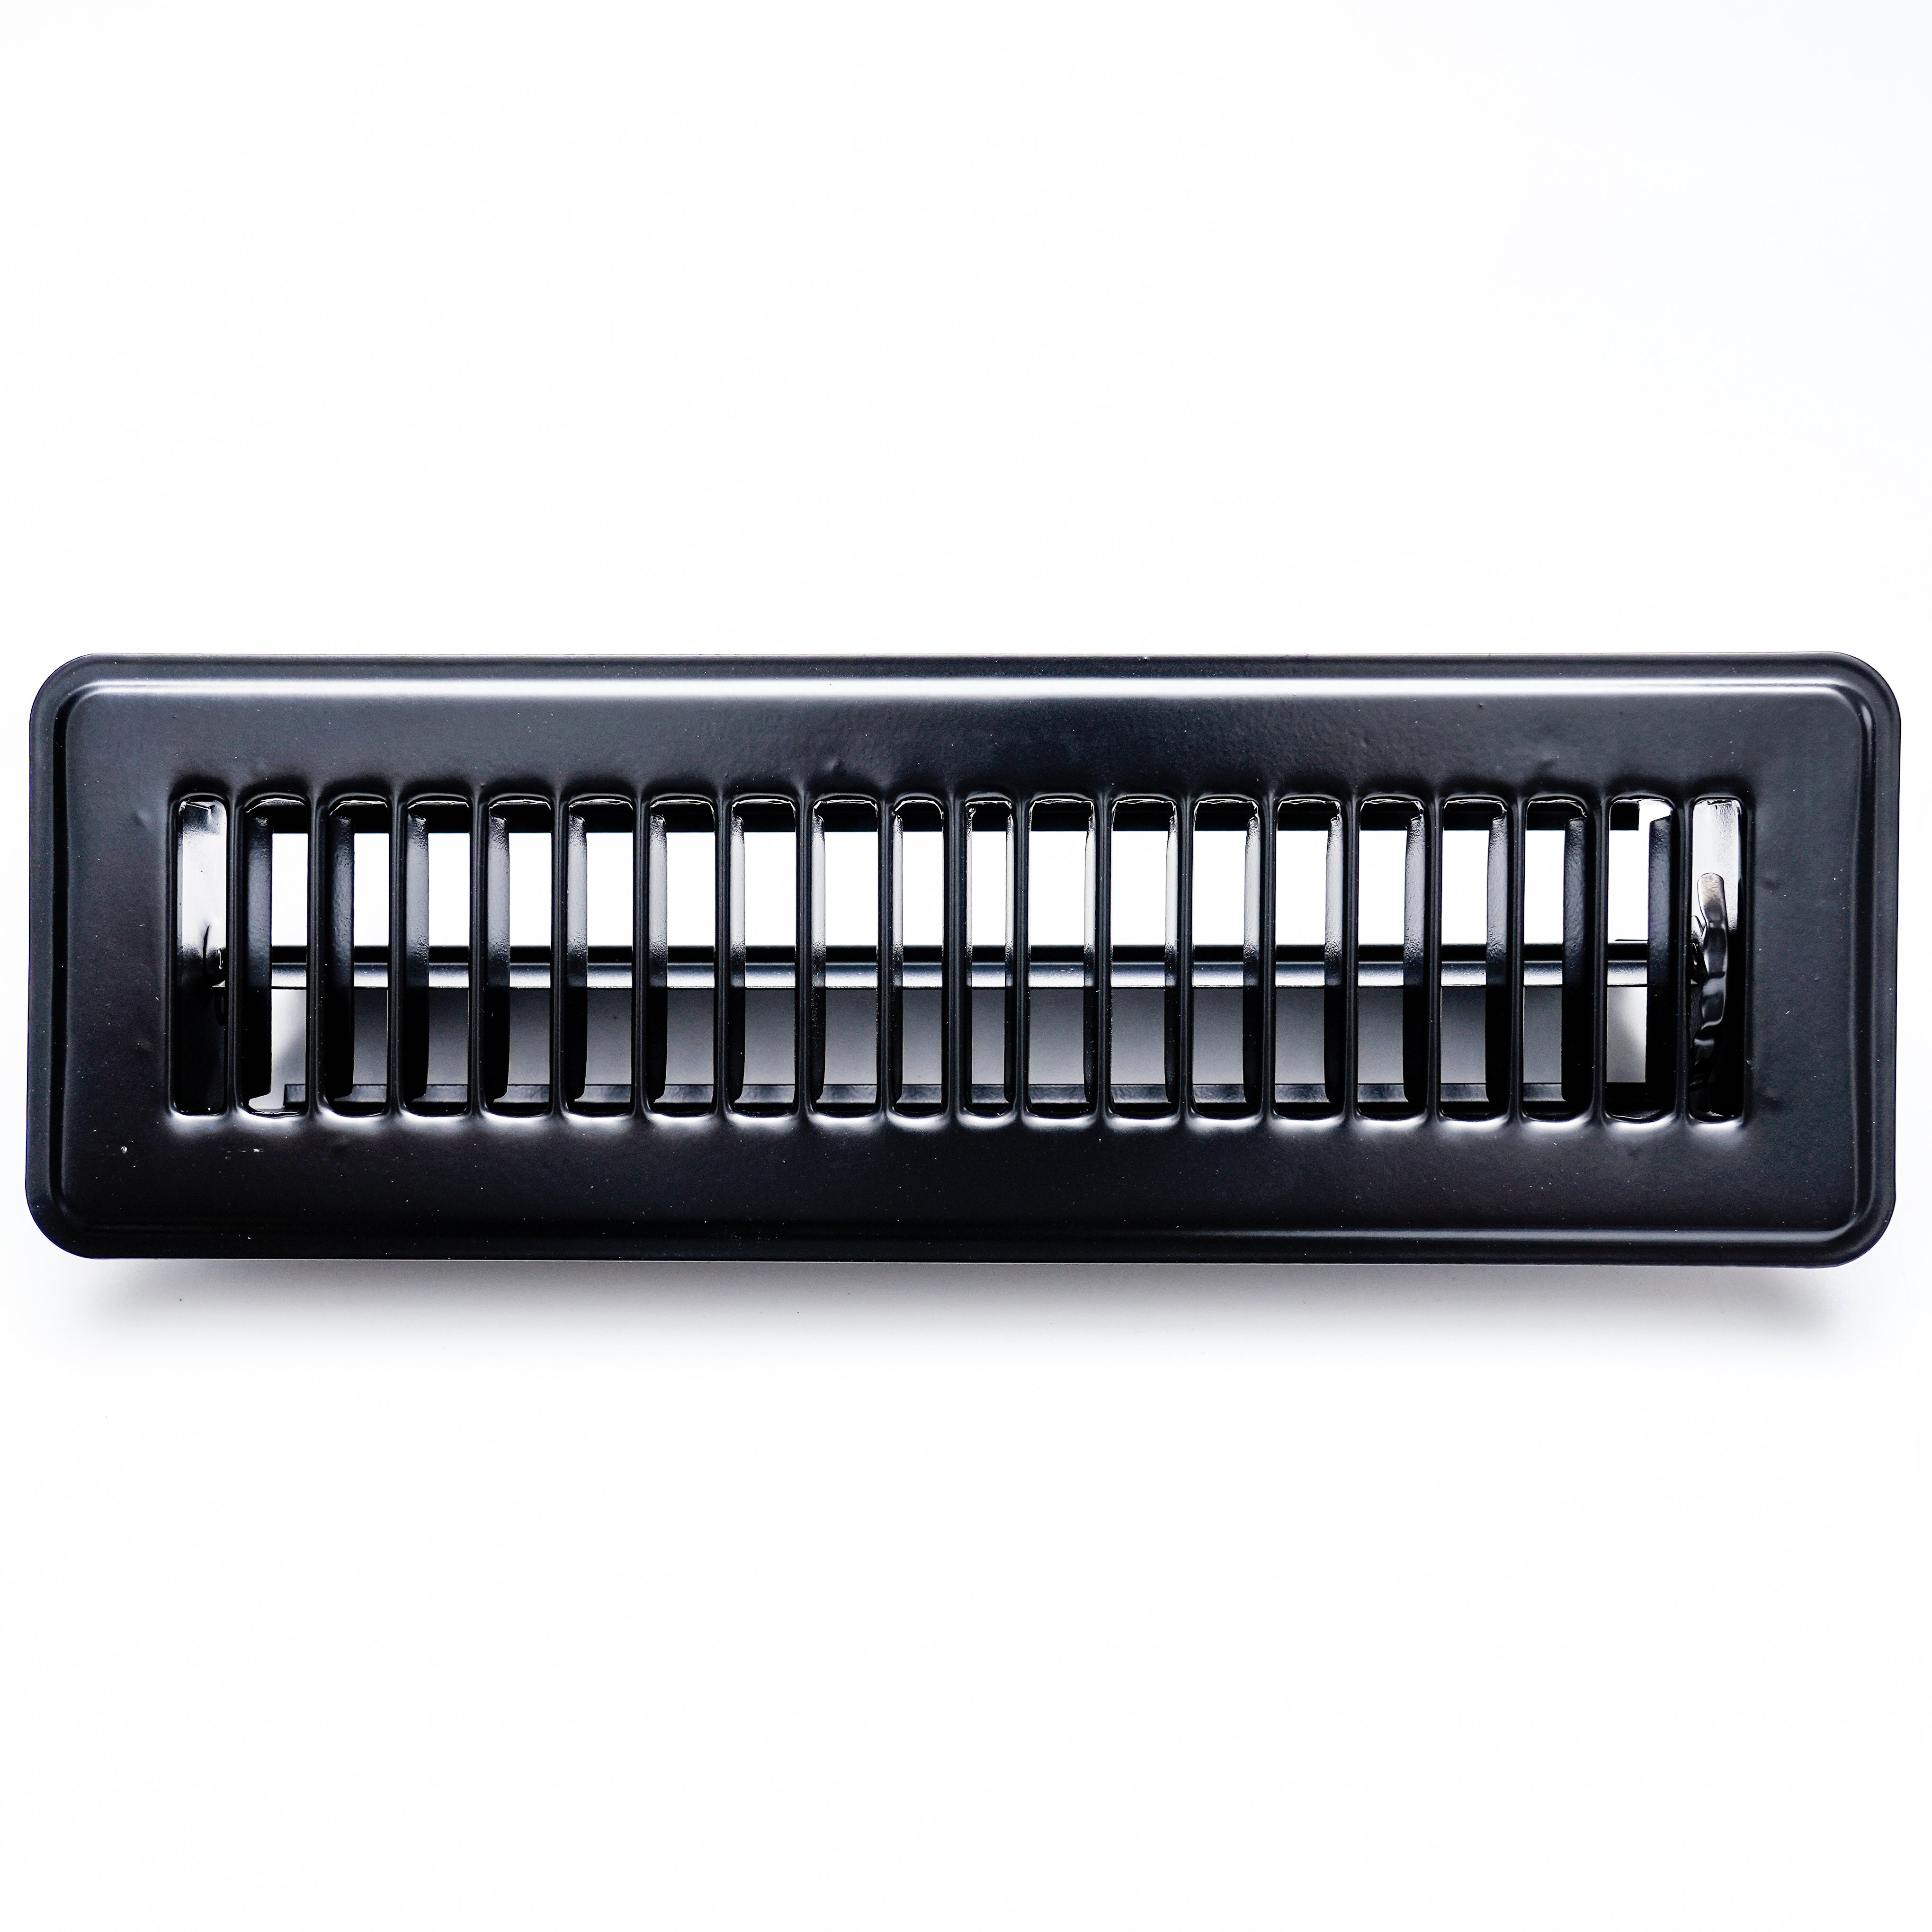 airgrilles 2" x 10" floor register with louvered design   heavy duty walkable design with damper   floor vent grille   easy to adjust air supply lever   black hnd-flg-bl-2x10  - 1